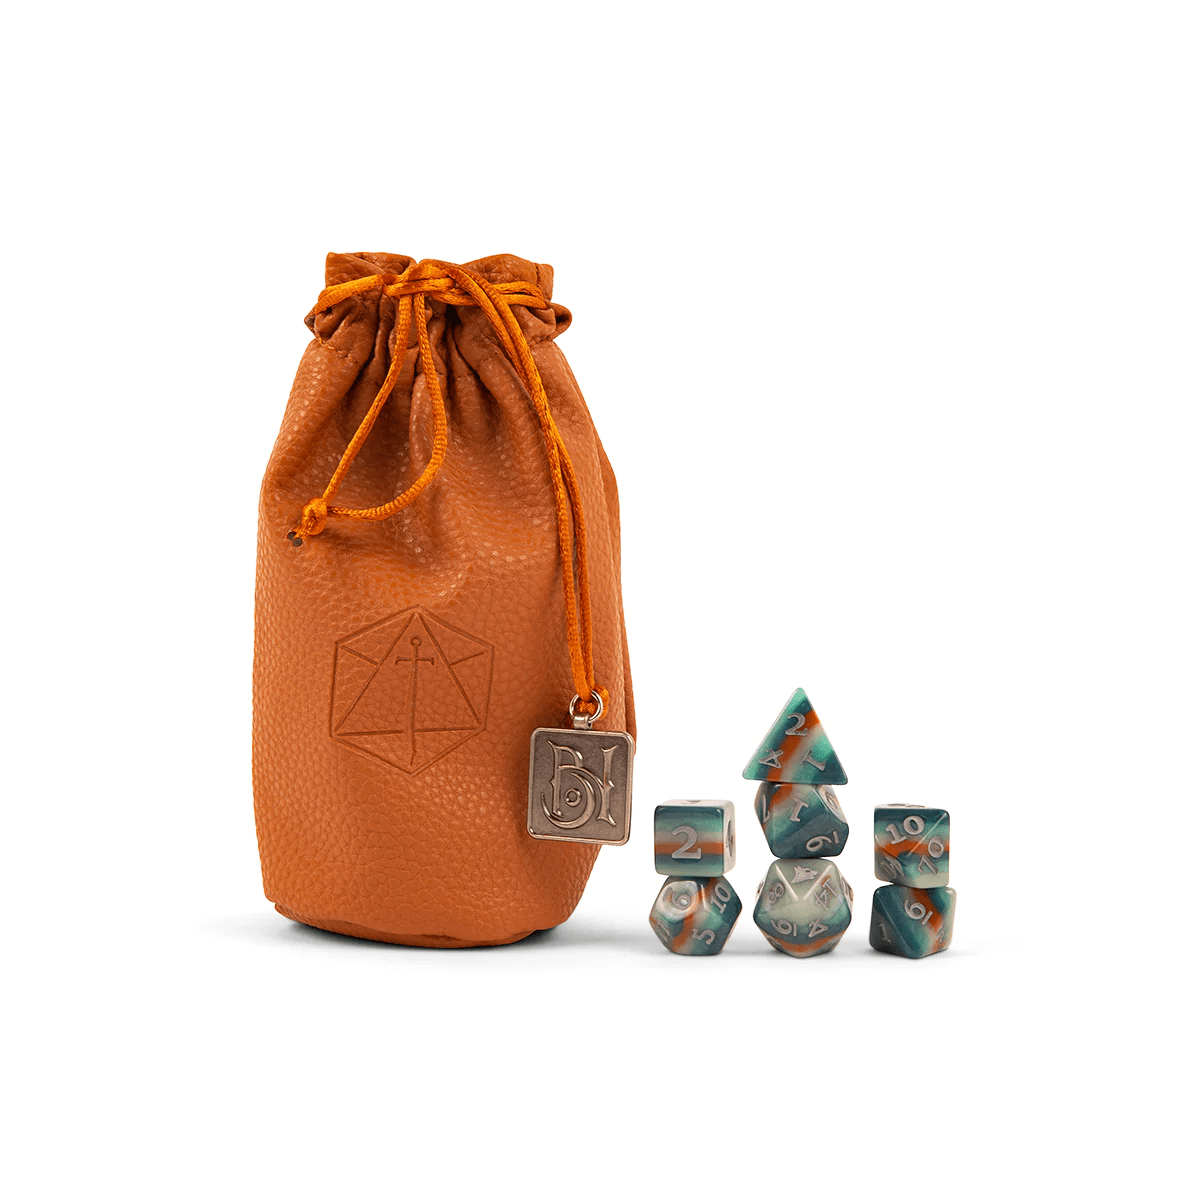 Bells Hells Dice Set: Chetney Pock O'Pea (Brown/Striped) - The Fourth Place